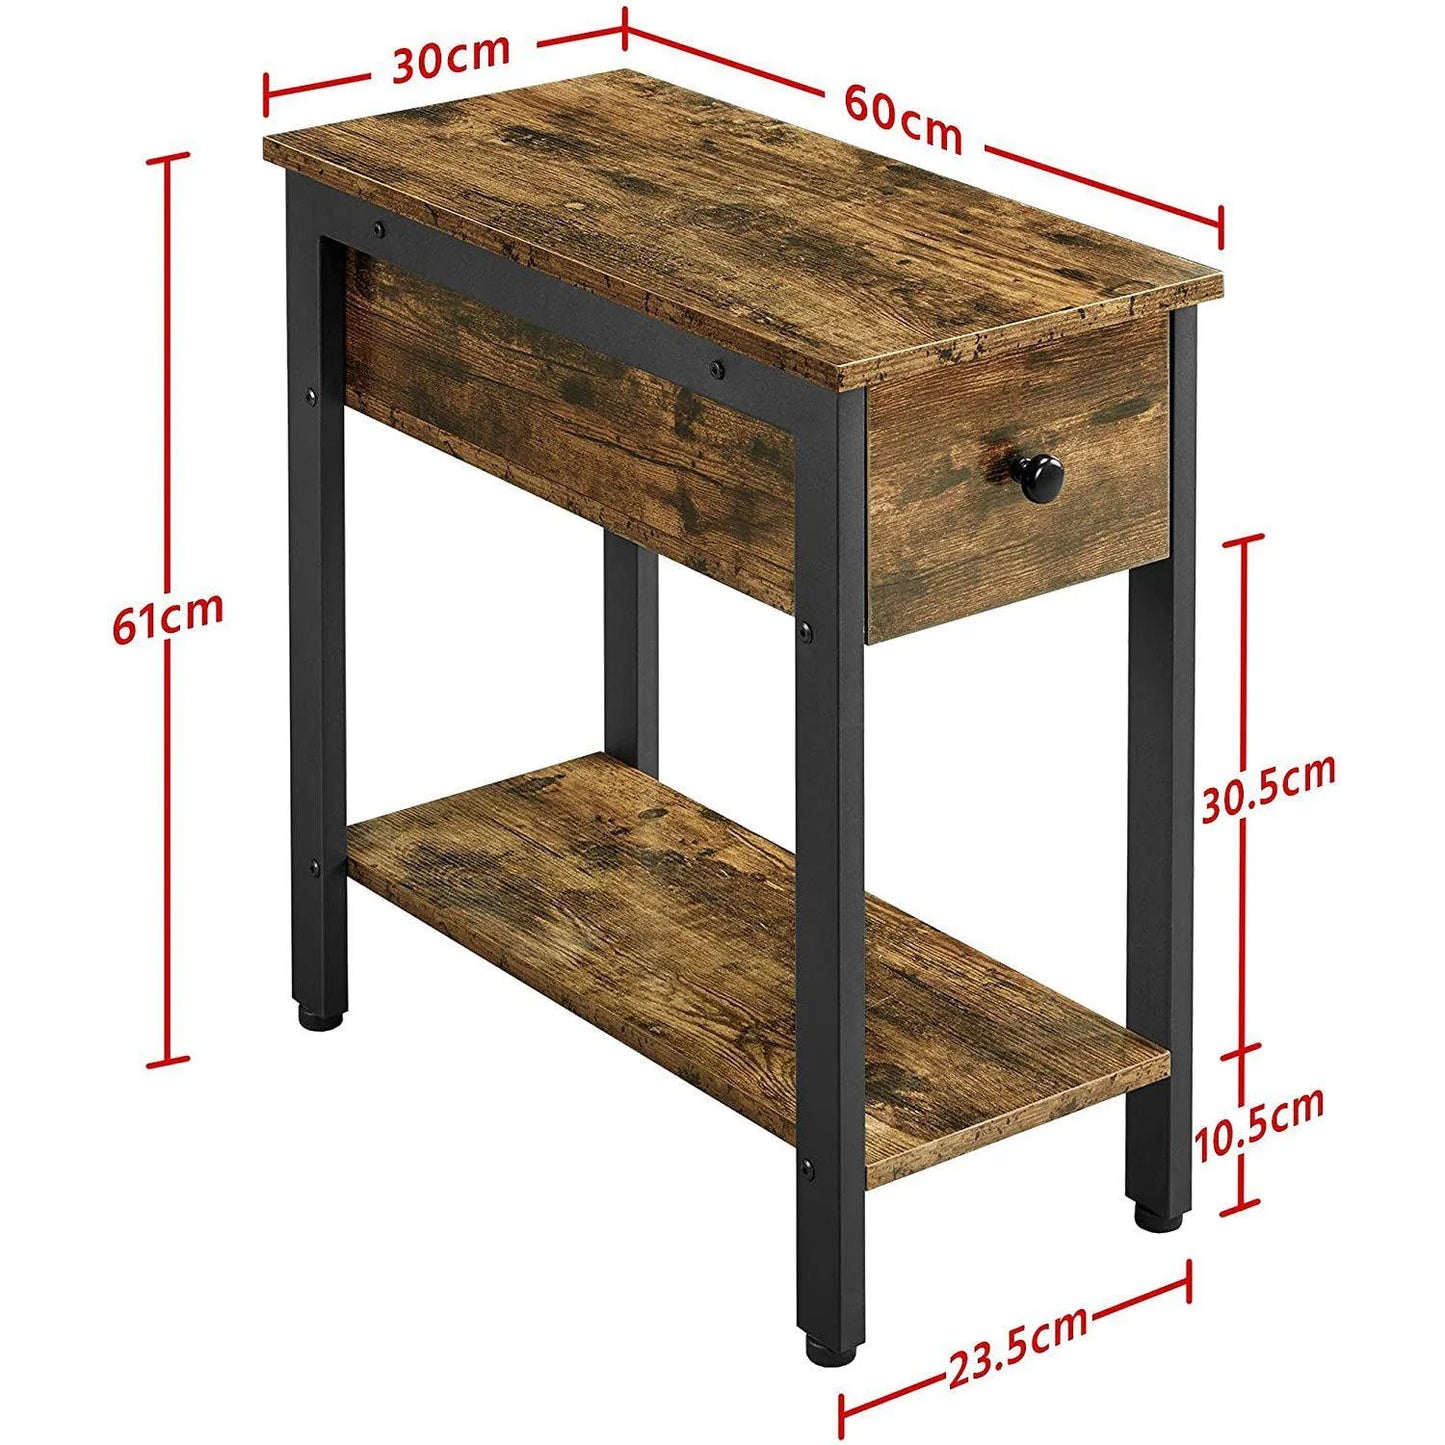 End Table - Rustic Side Table - Small Side Table With Drawer - Wooden Side Table With Storage - Wooden End Table With Storage